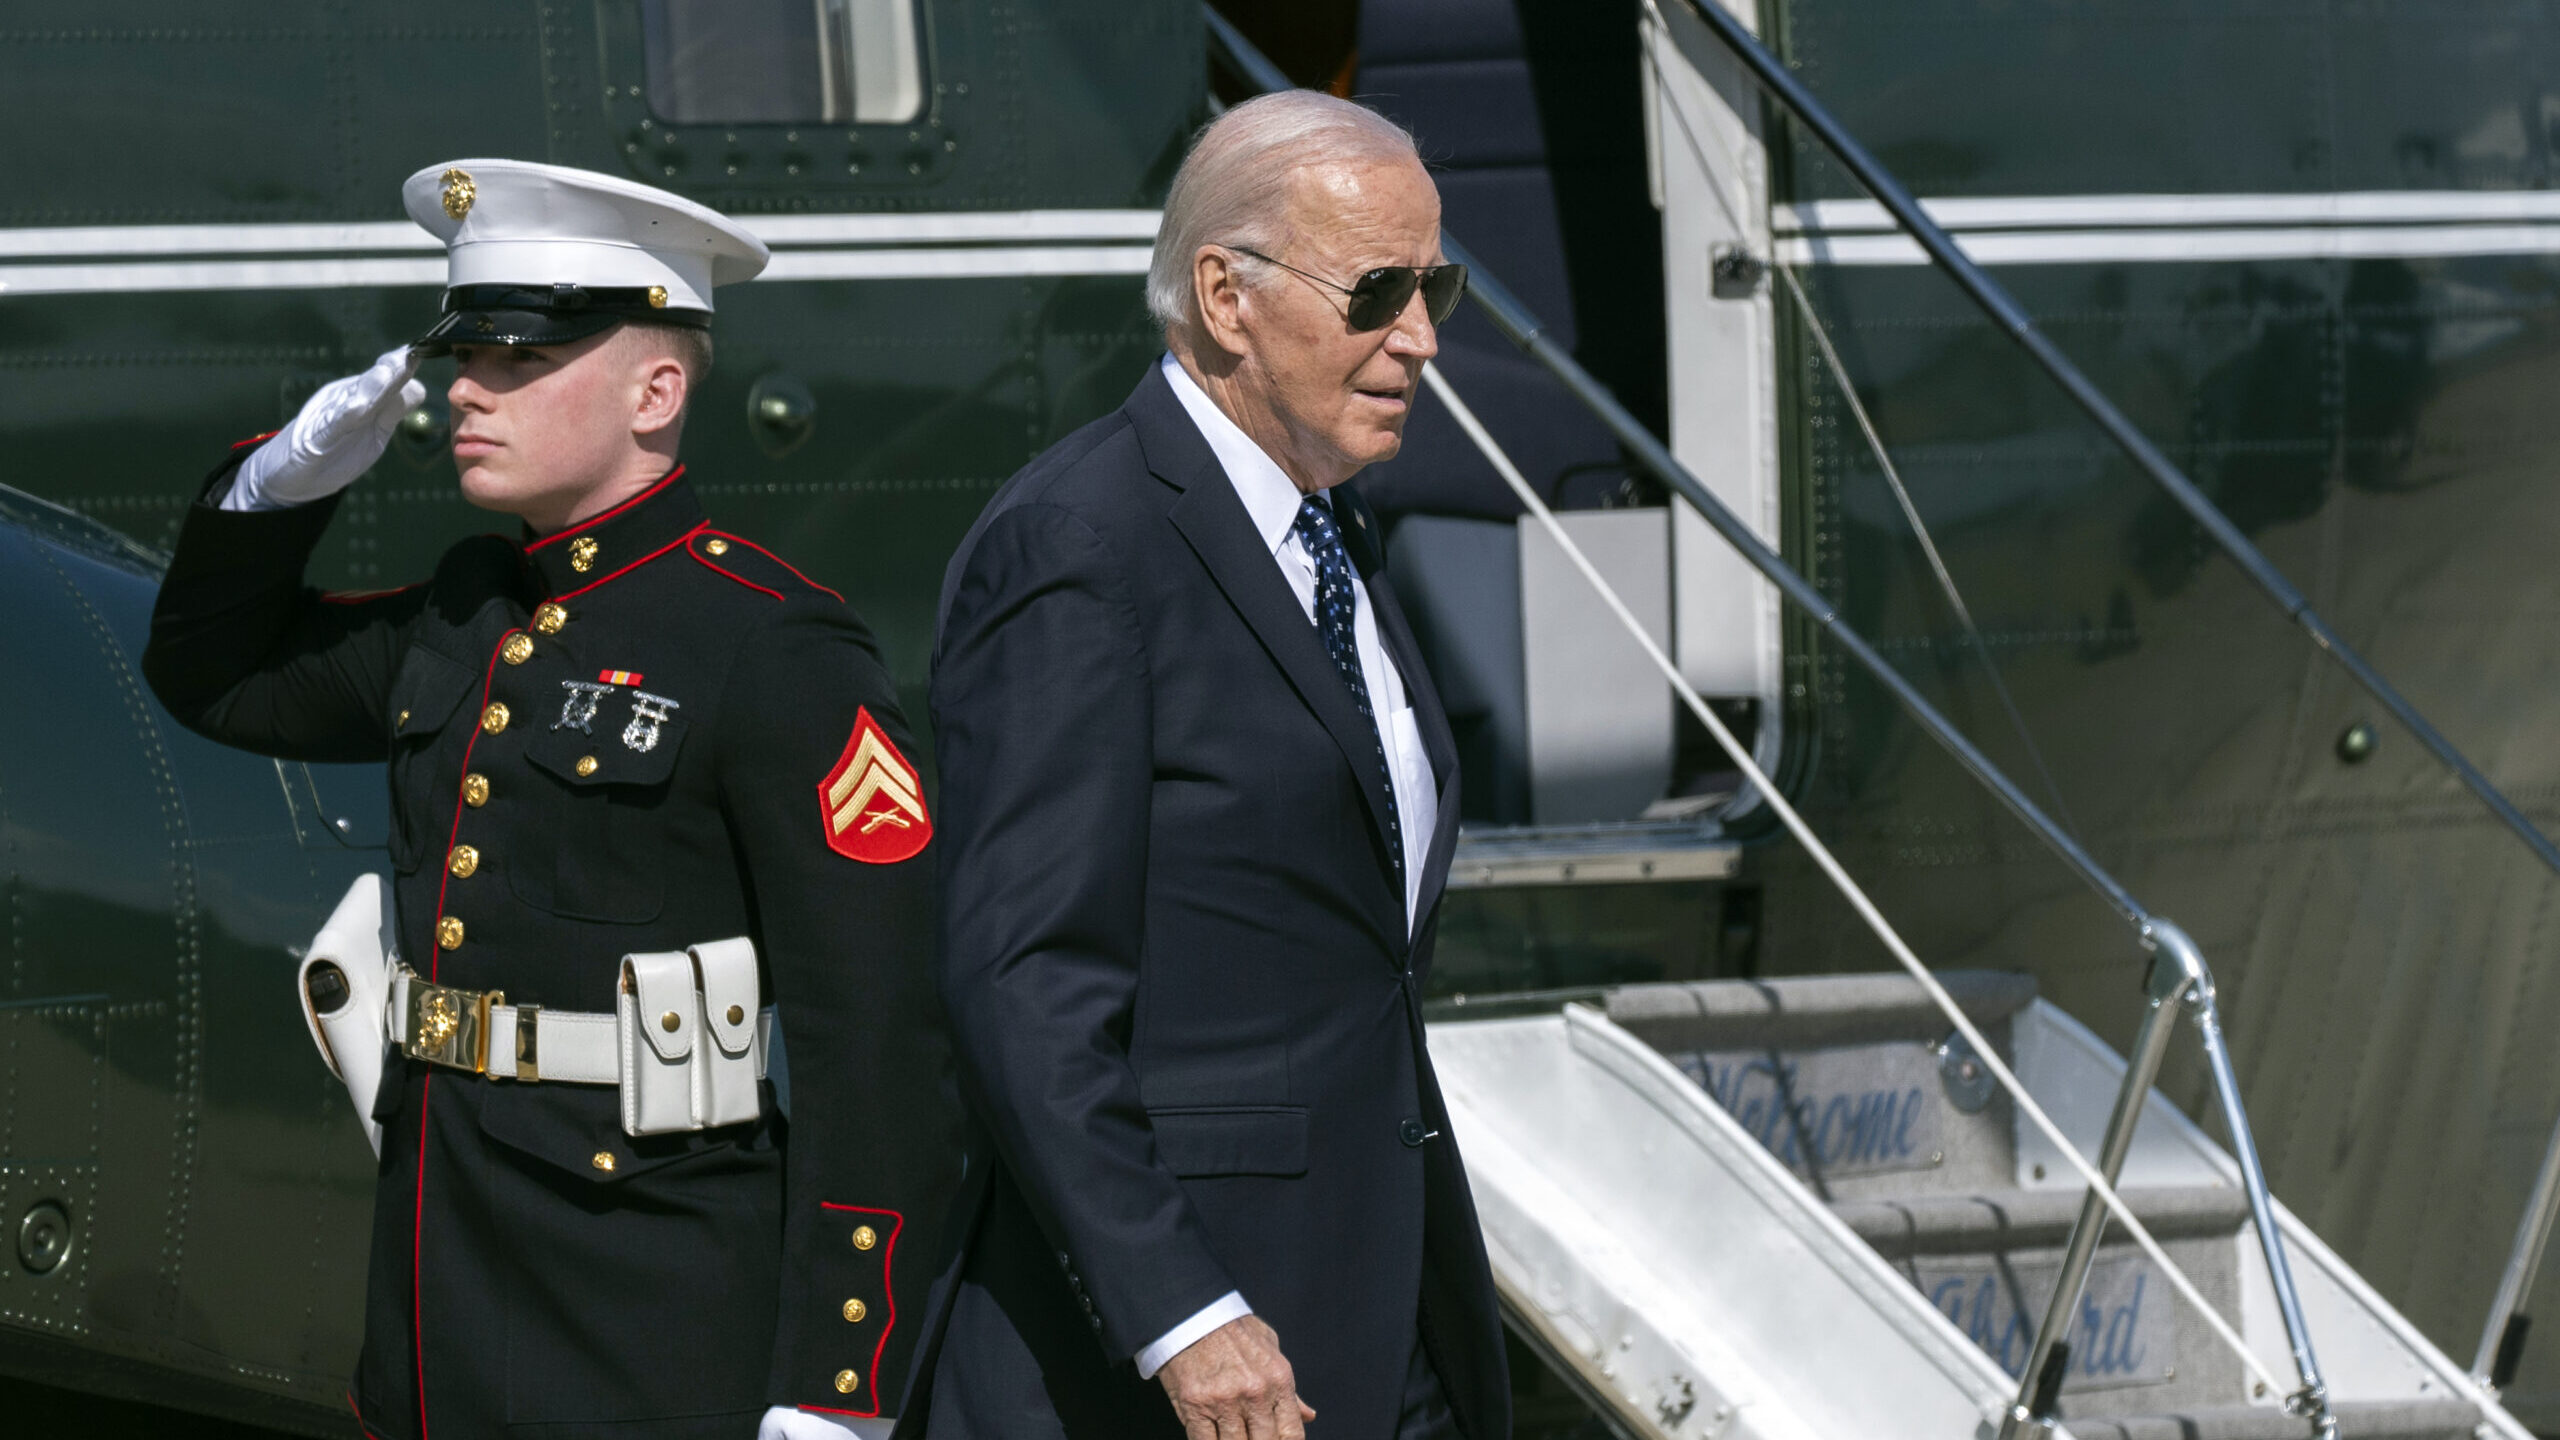 president biden shown, he and former president trump are visiting the border in texas...